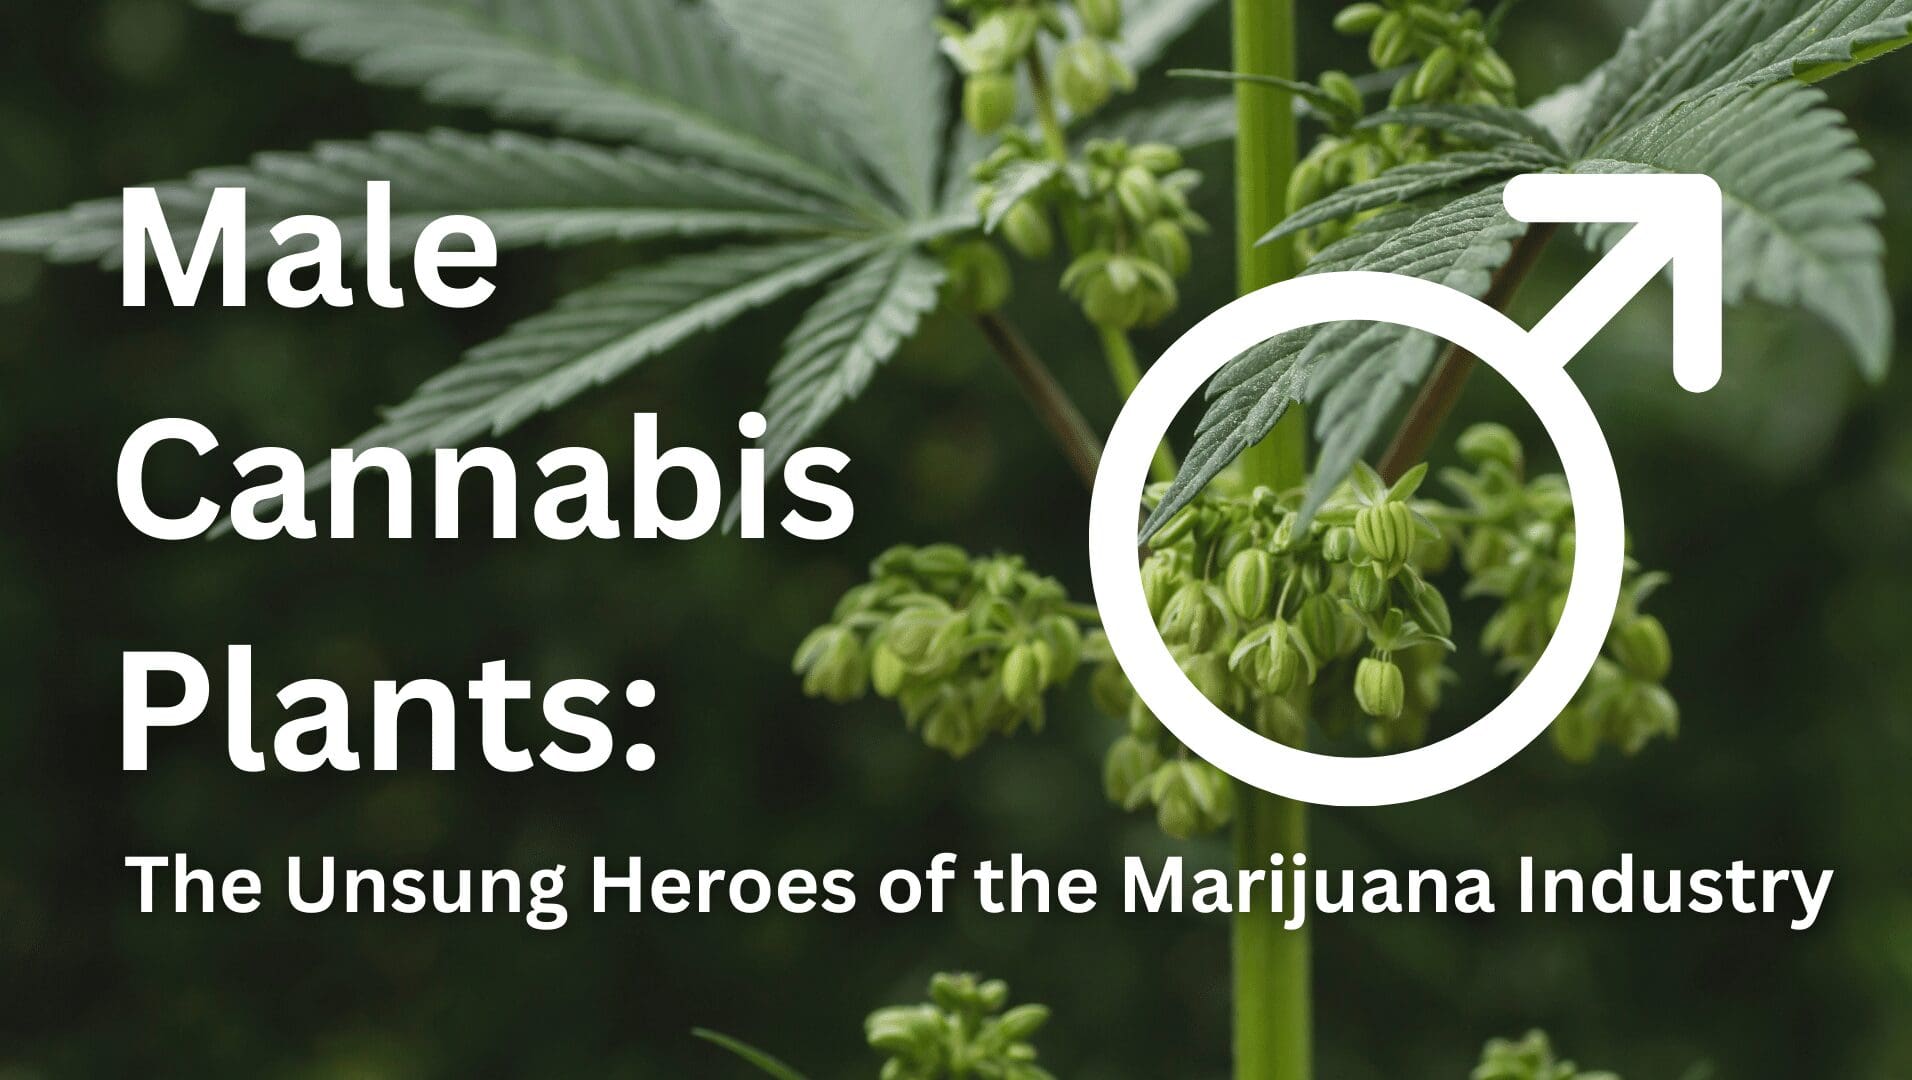 Male Cannabis Plants: The Unsung Heroes of the Marijuana Industry